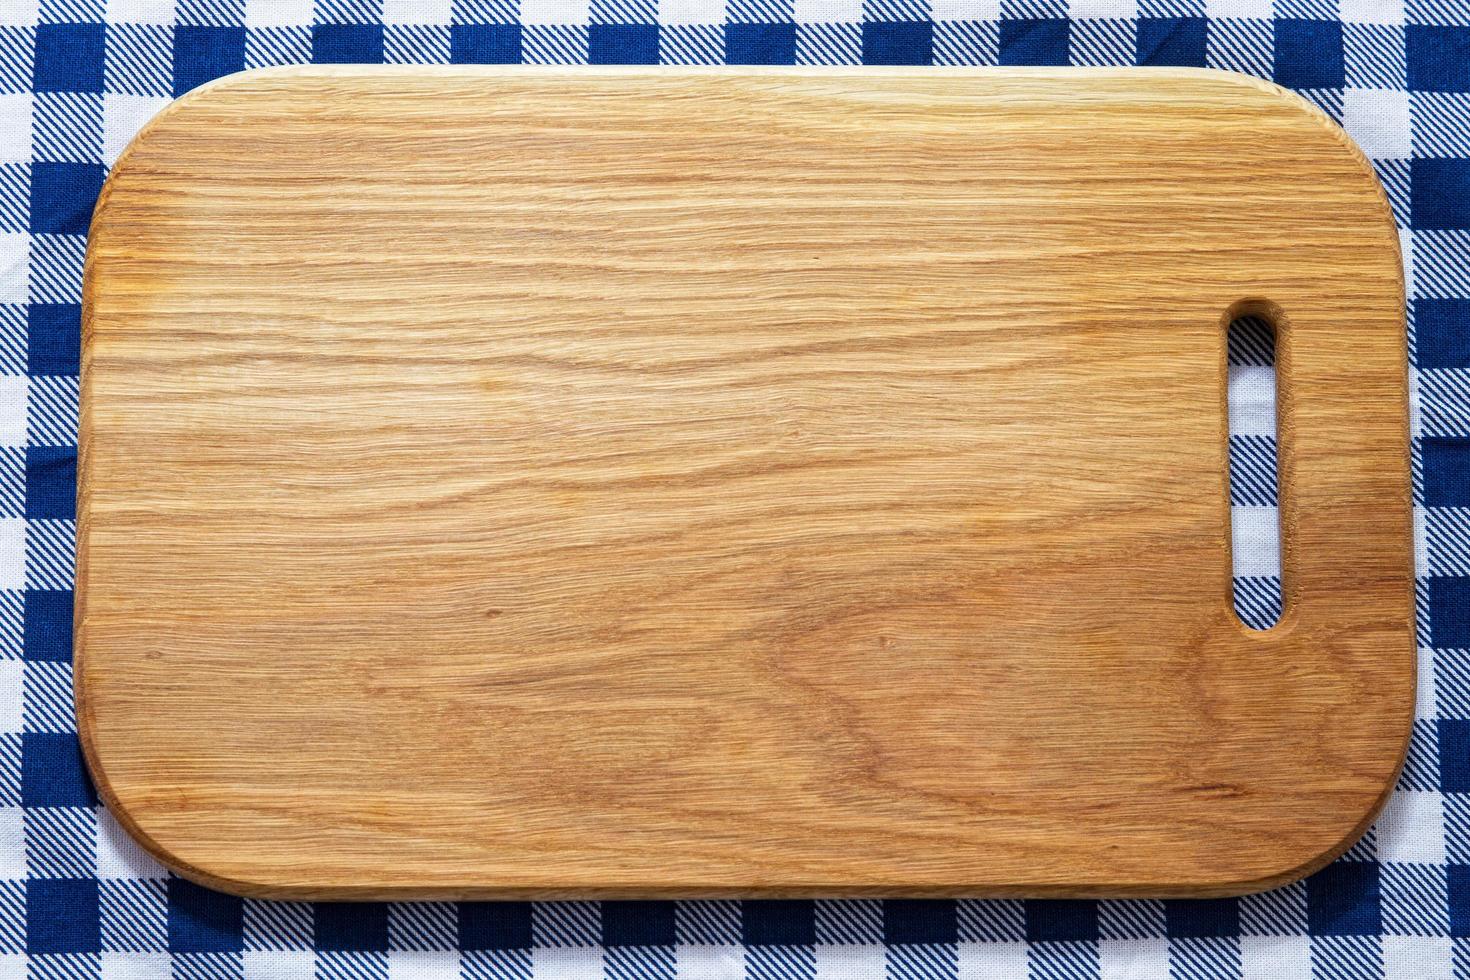 Close up of Wooden cutting board on checkered tablecloth napkin photo